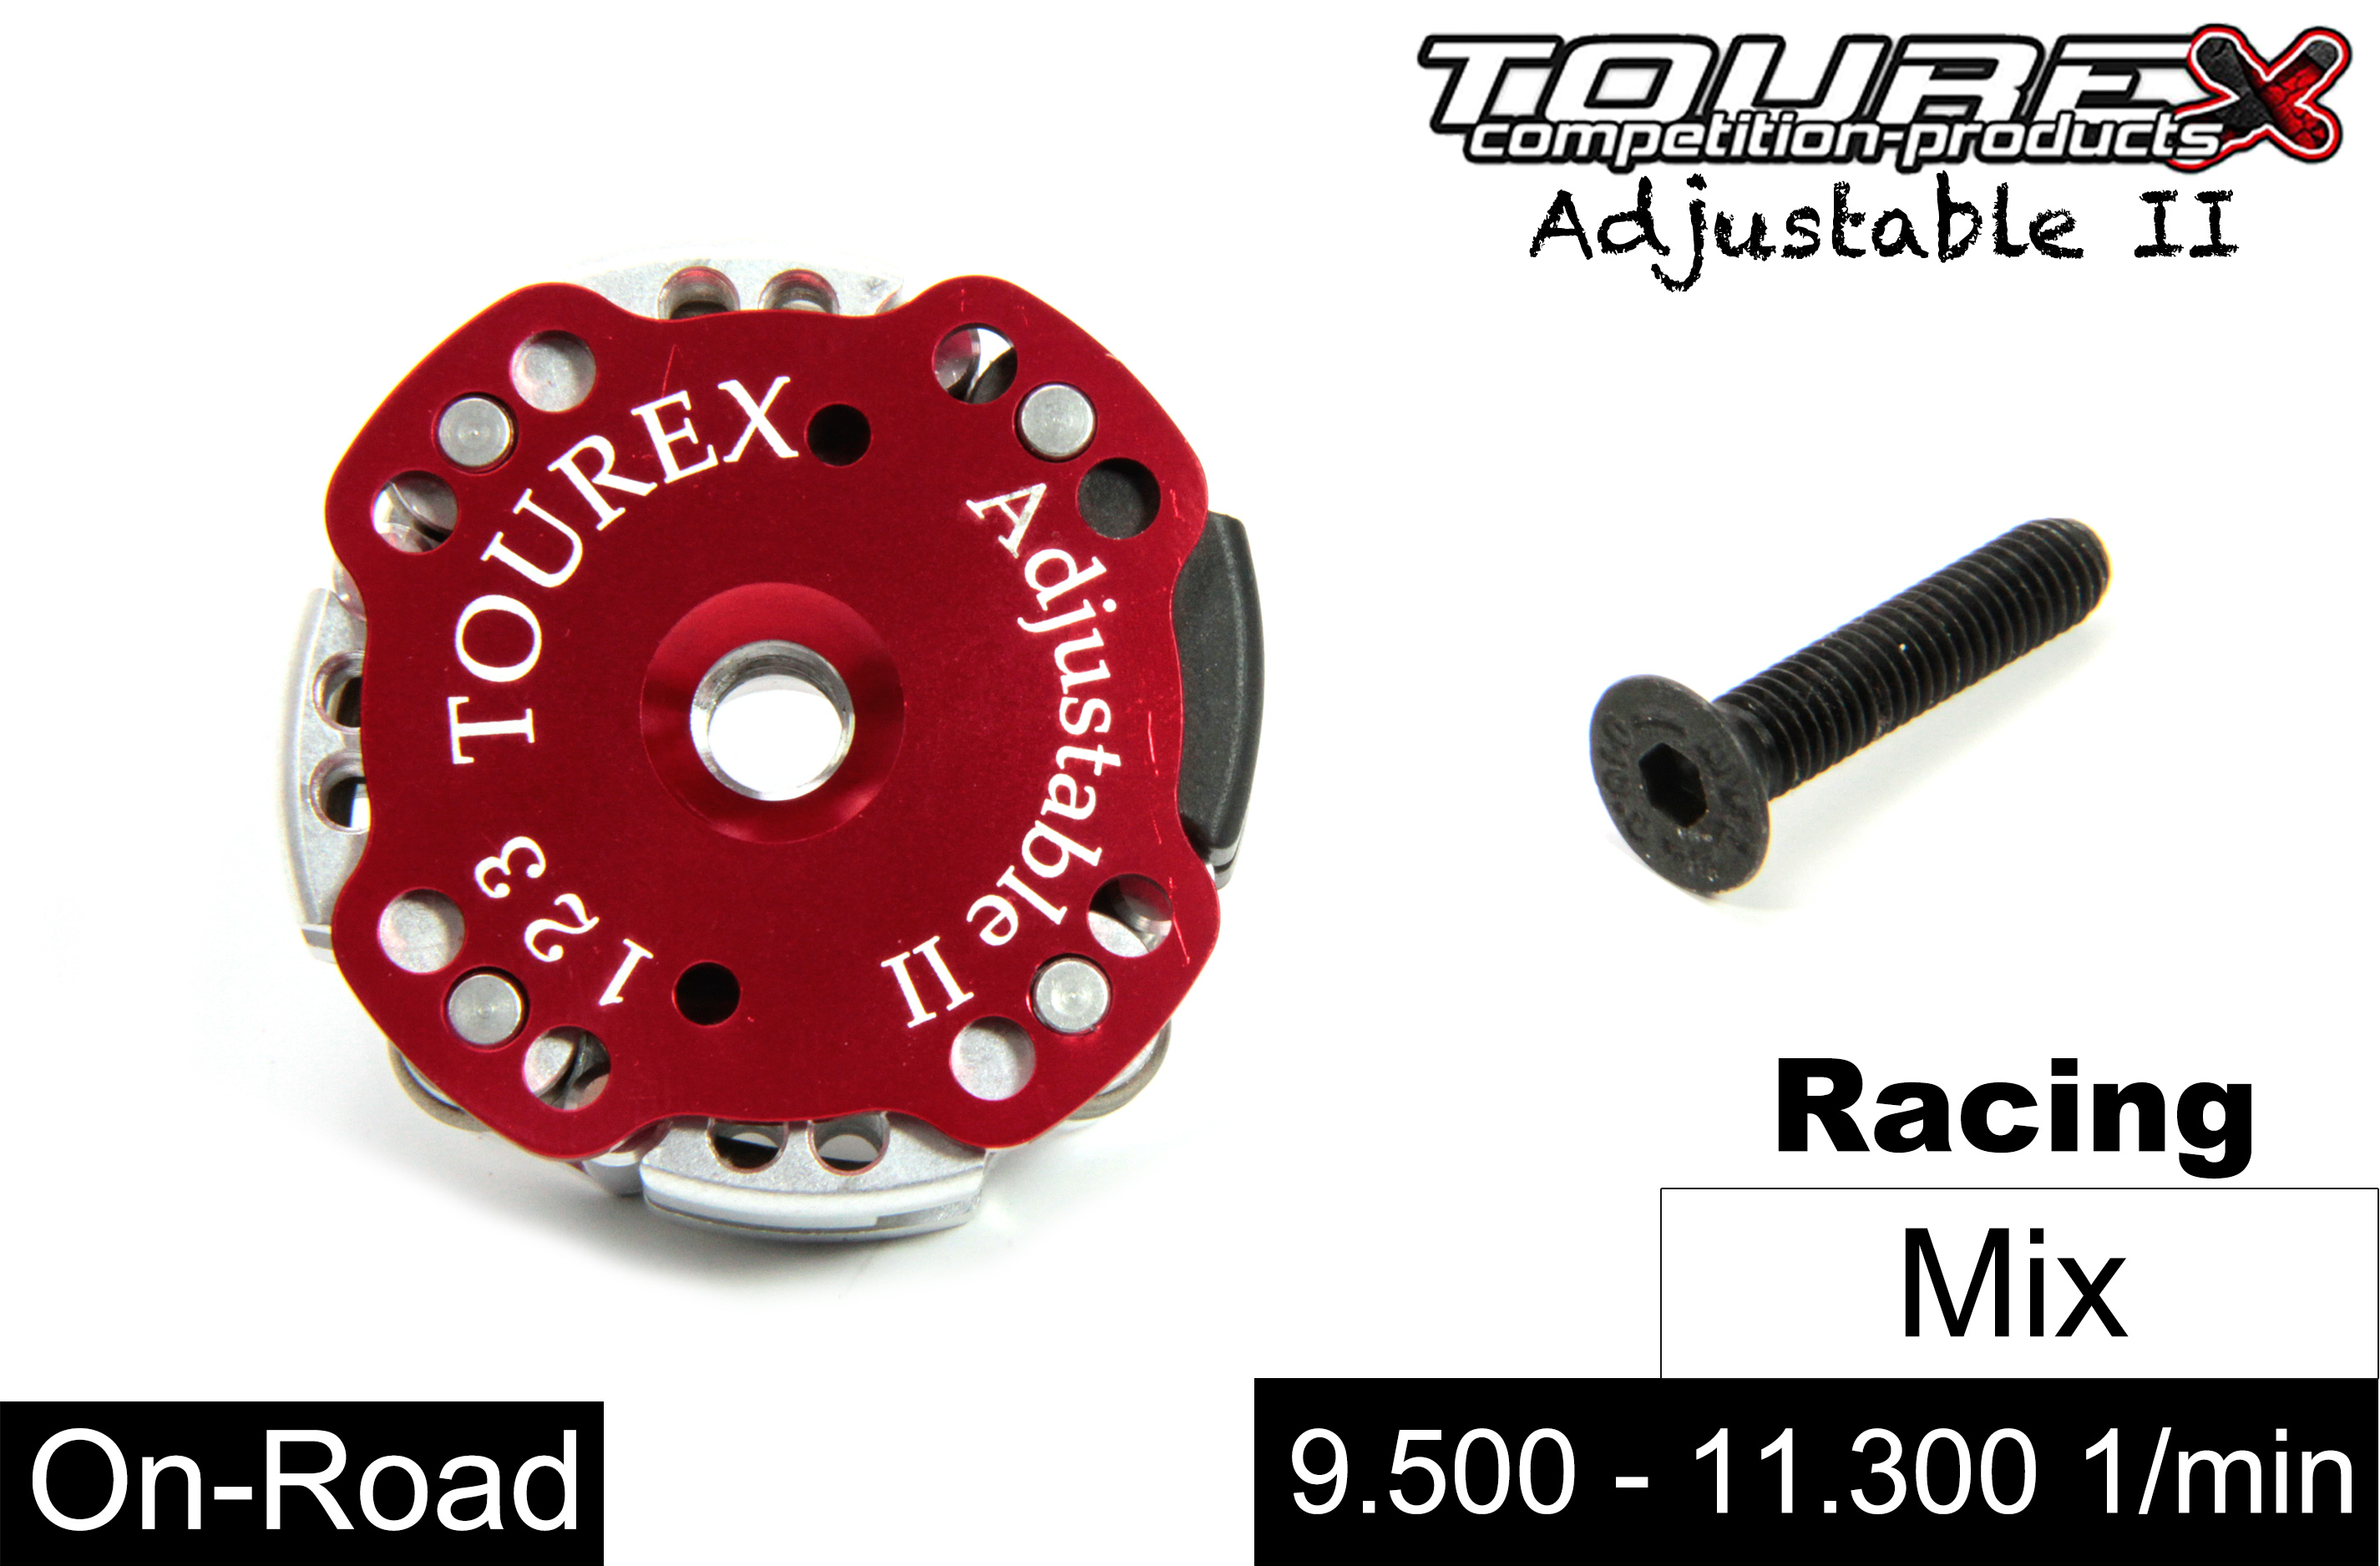 TXLS510-MIX Tourex Big-Speed Adjustable 2 for FG/HPI/Losi/Smartech and many more